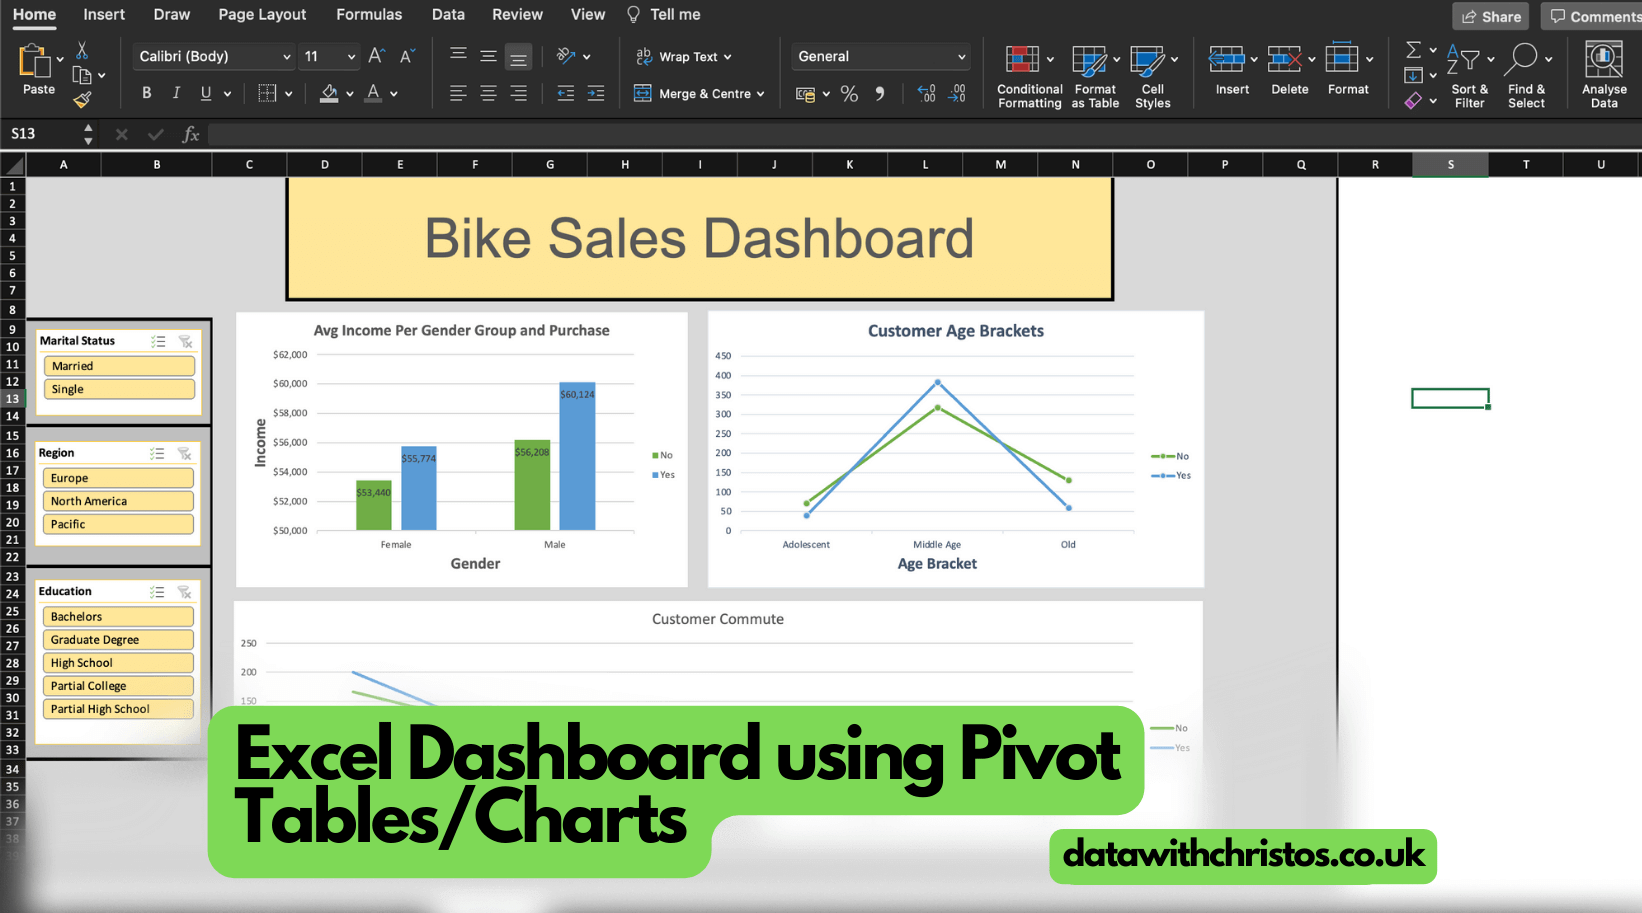 Excel Dashboard using Pivot Tables/Charts